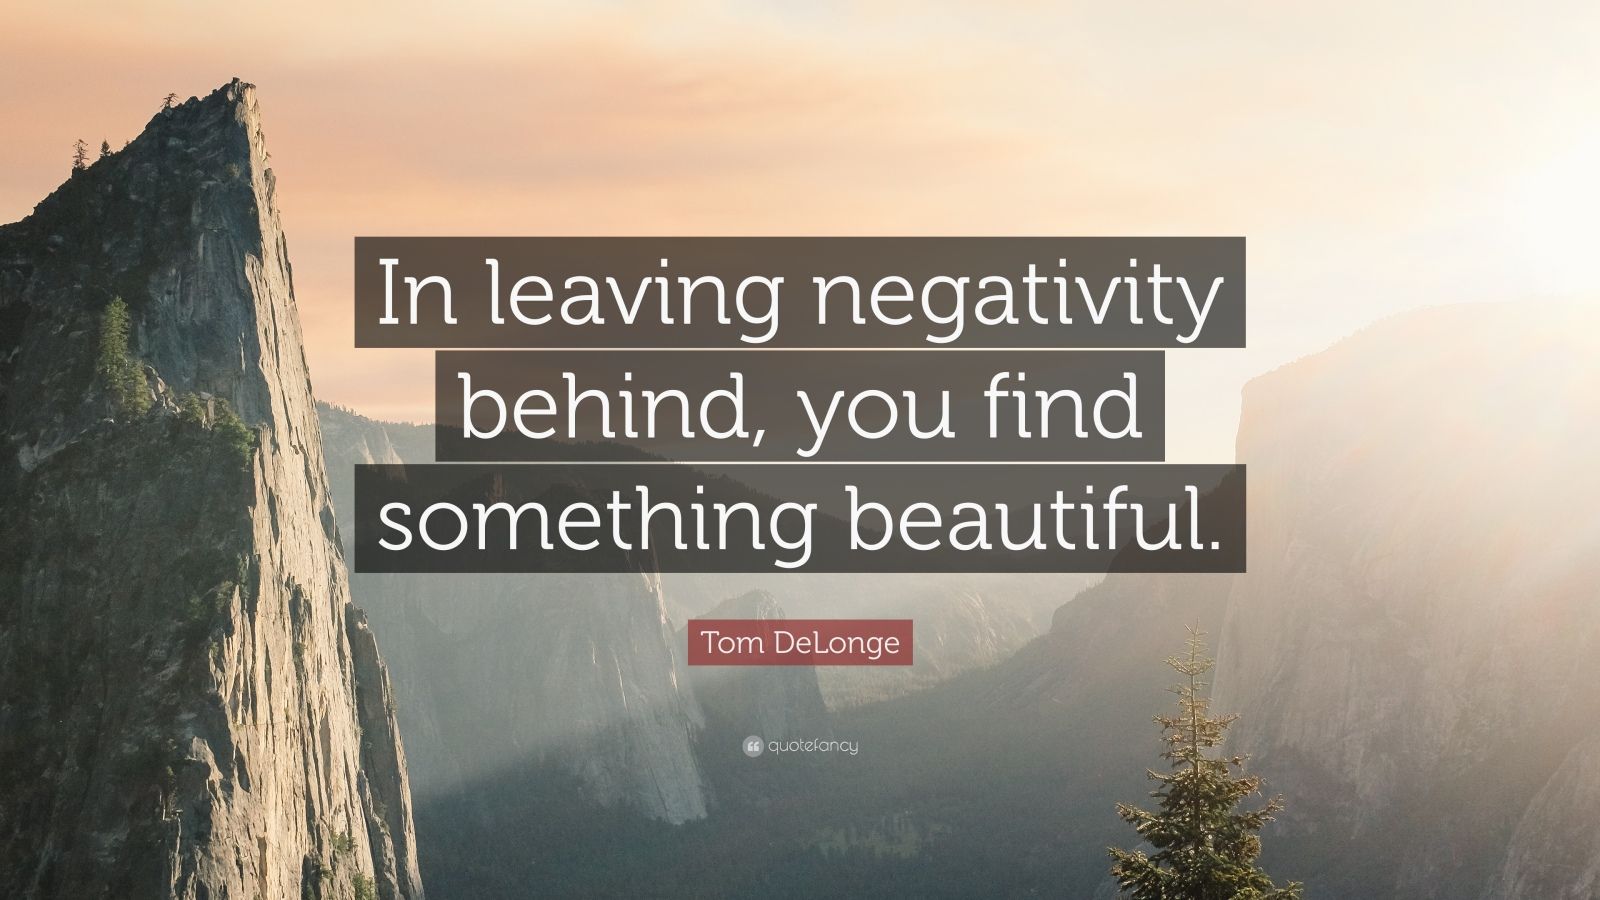 Tom DeLonge Quote: “In leaving negativity behind, you find something